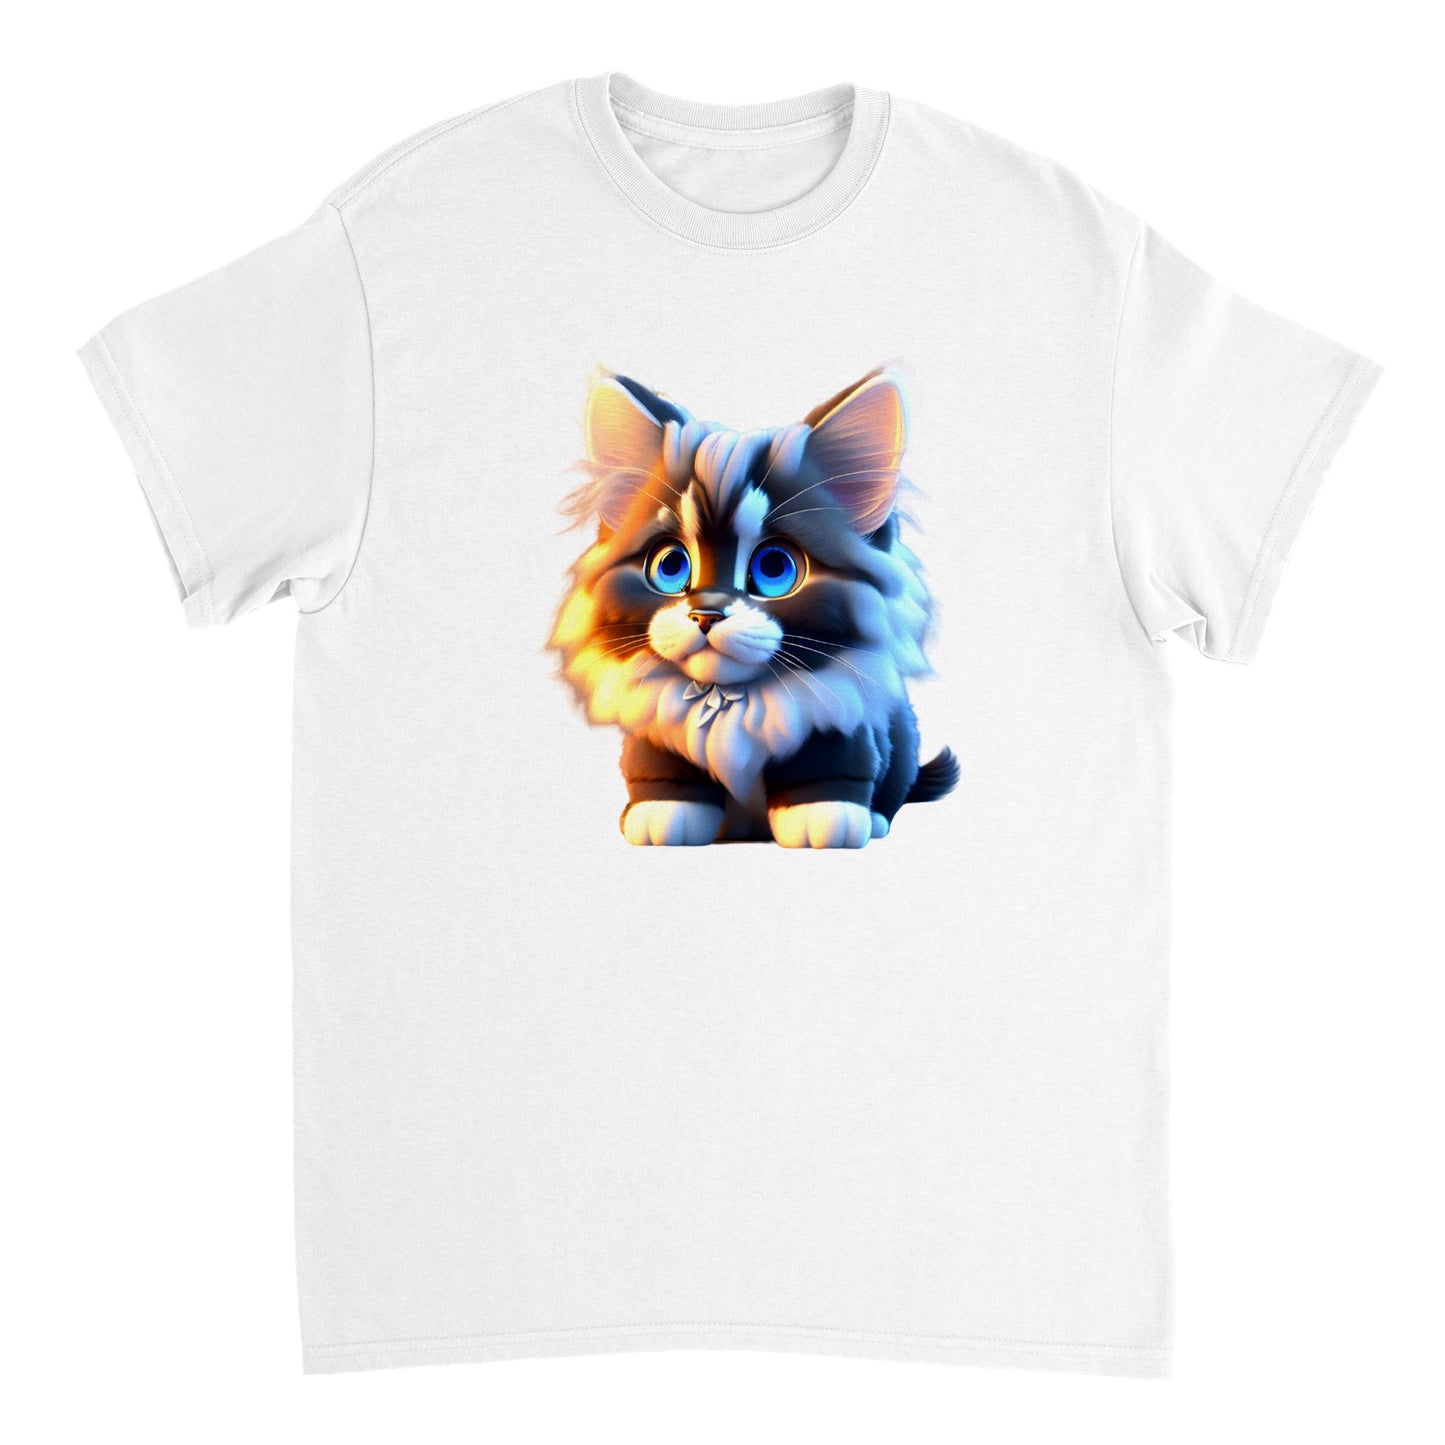 Adorable, Cool, Cute Cats and Kittens Toy - Heavyweight Unisex Crewneck T-shirt 6